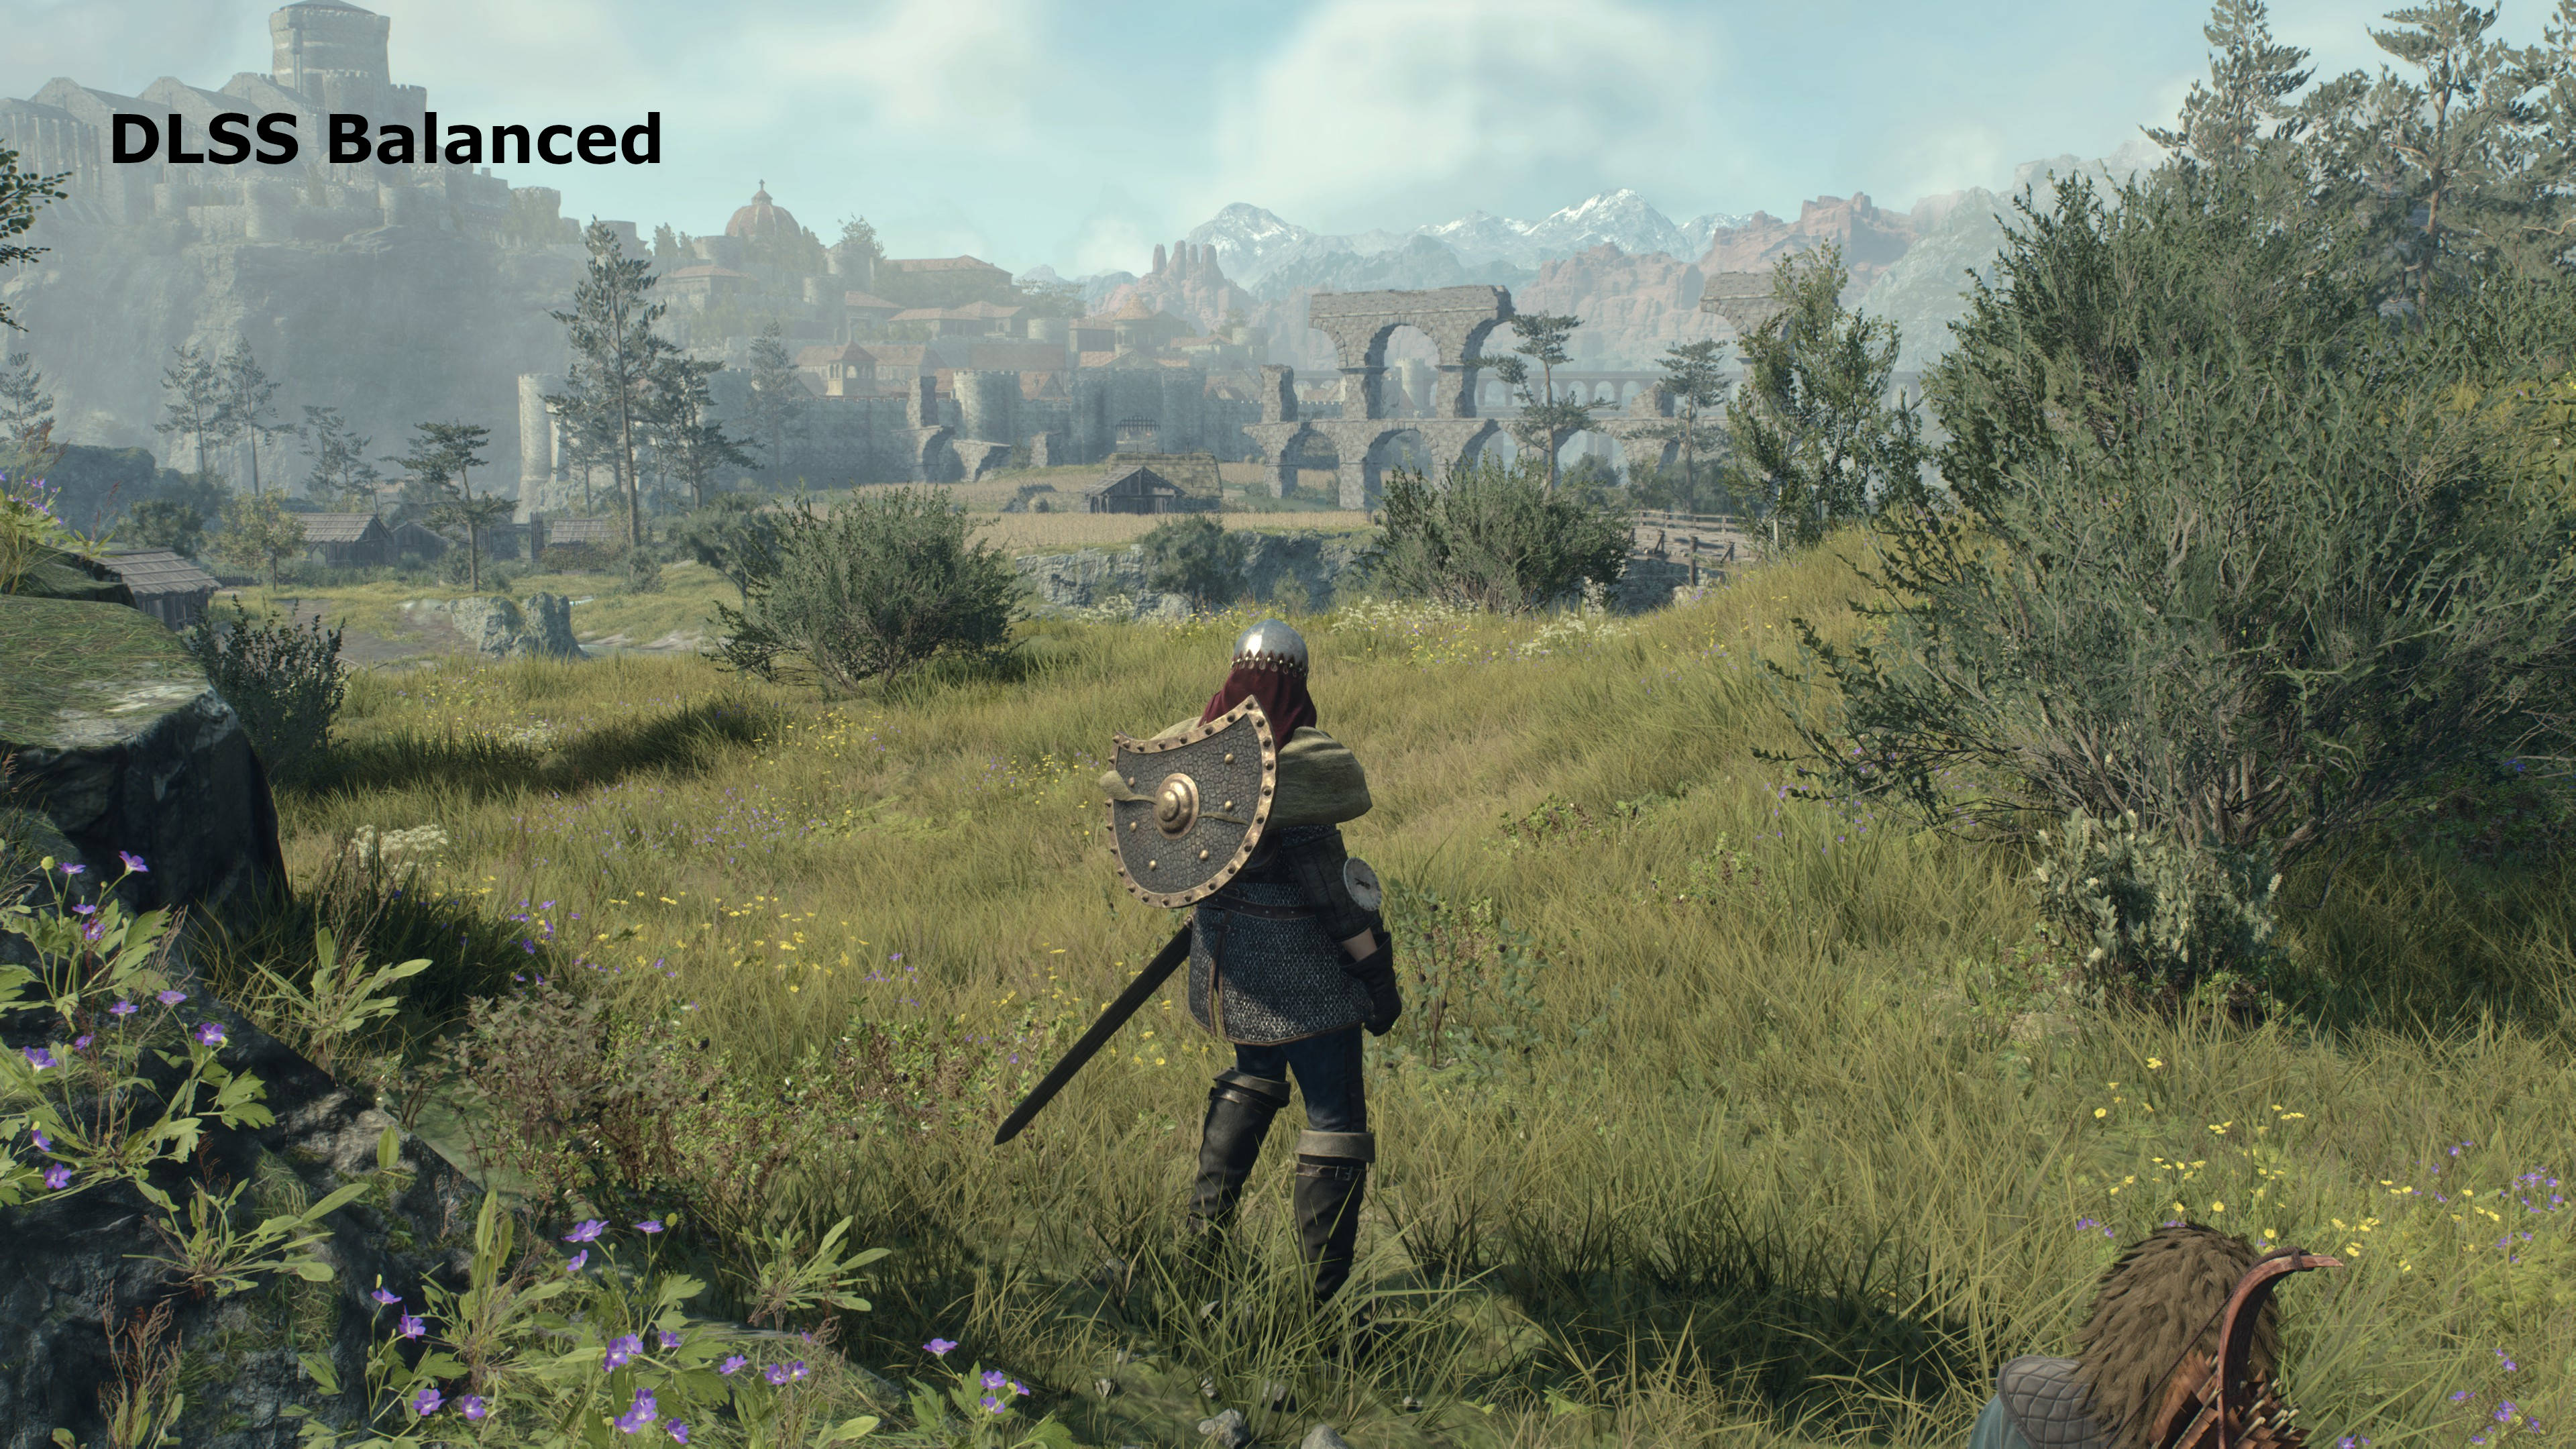 Screenshots of Dragon's Dogma 2, showing an open world view, with a buildings and mountains in the distance